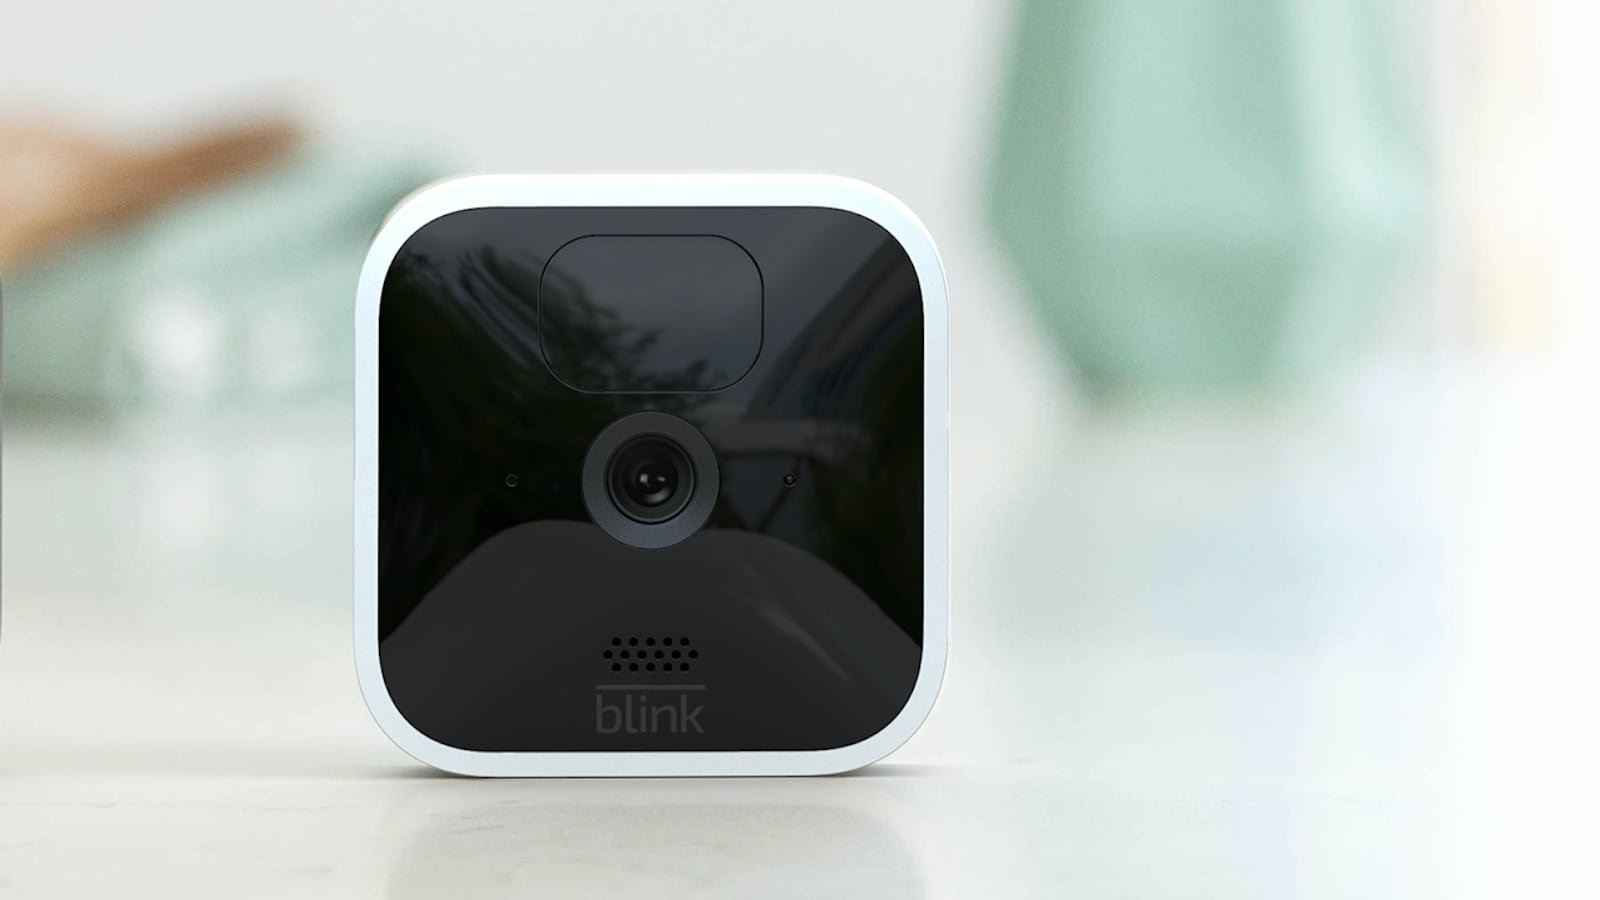 Blink Indoor security camera boasts a two-year-long battery life